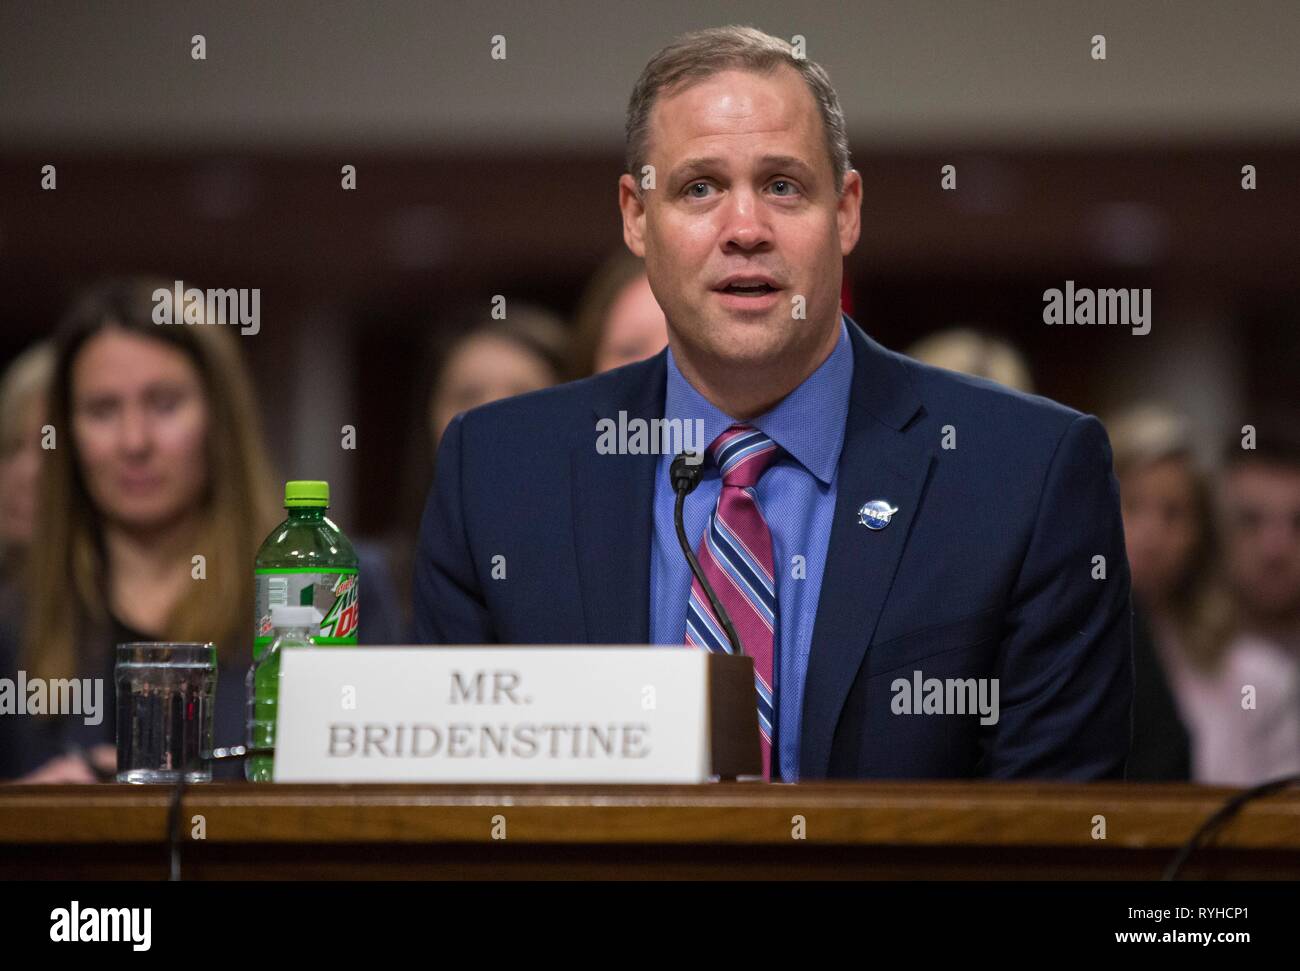 Washington, United States Of America. 13th Mar, 2019. NASA Administrator Jim Bridenstine during a hearing of the Senate Committee on Commerce, Science, and Transportation on The New Space Race: Ensuring U.S. Global Leadership on the Final Frontier, at the Dirksen Senate Office Building March 13, 2019 in Washington. DC. Credit: Planetpix/Alamy Live News Stock Photo